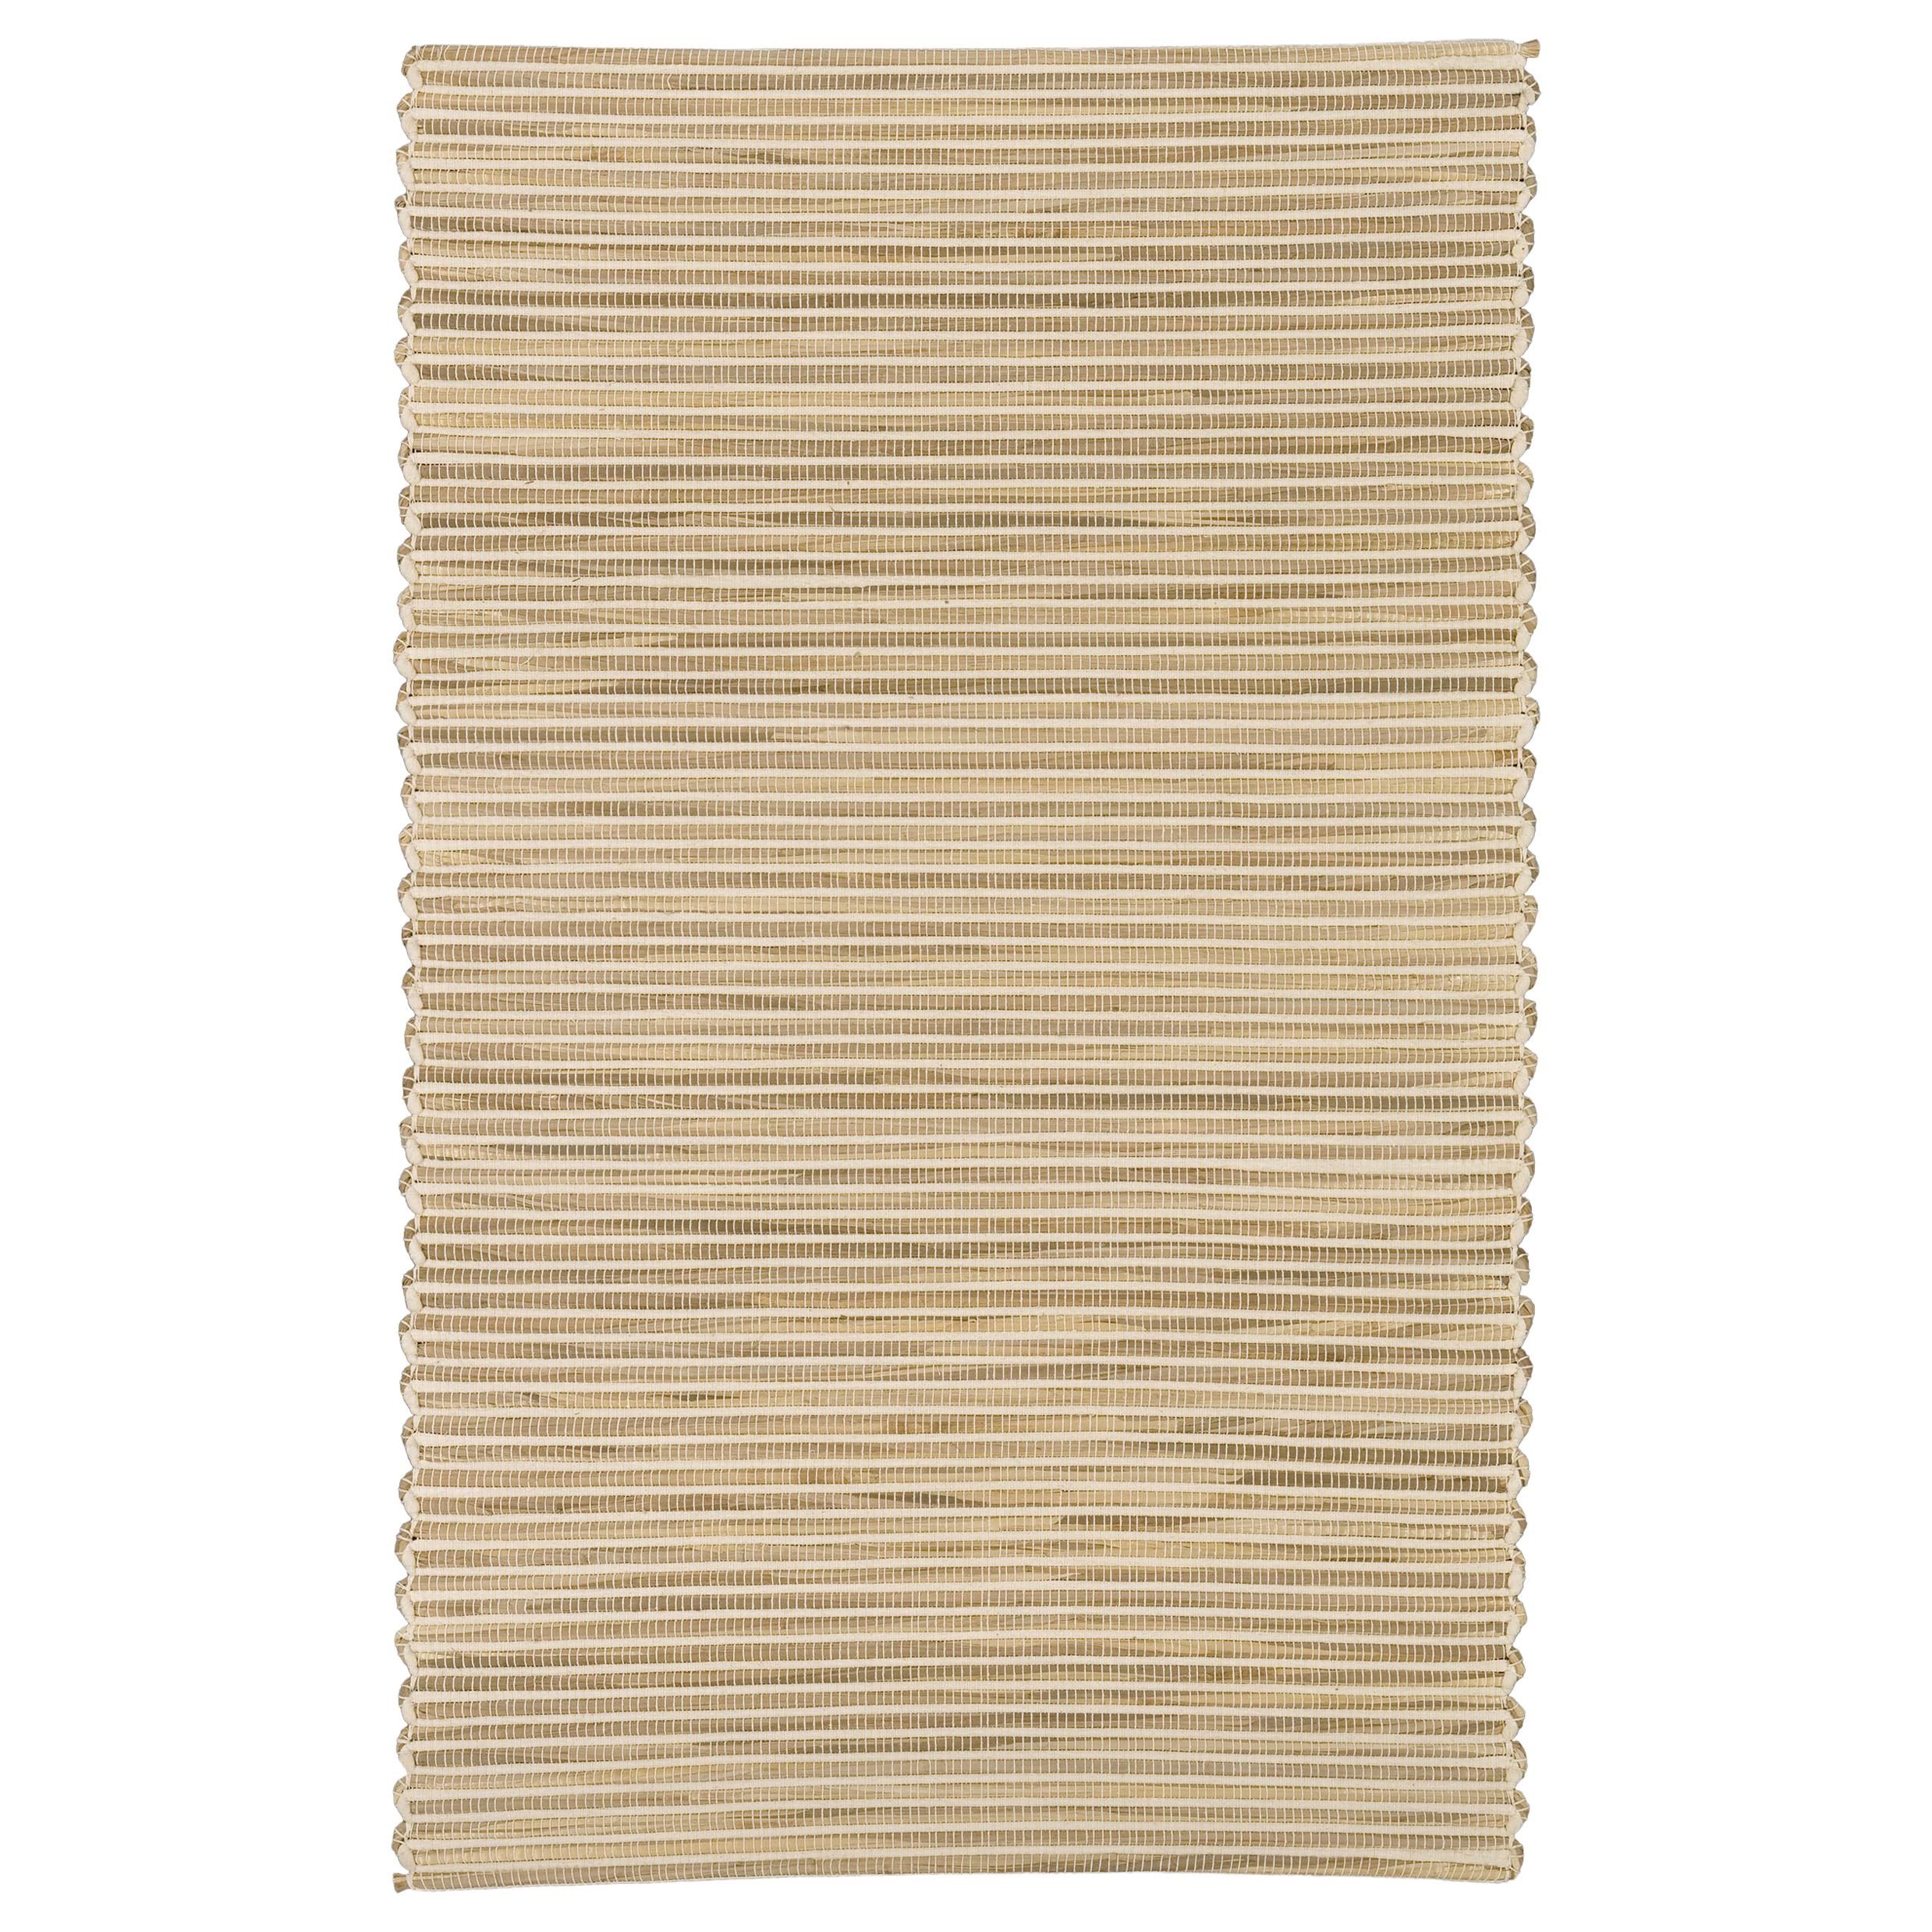 Contemporary South American Cattail Mat